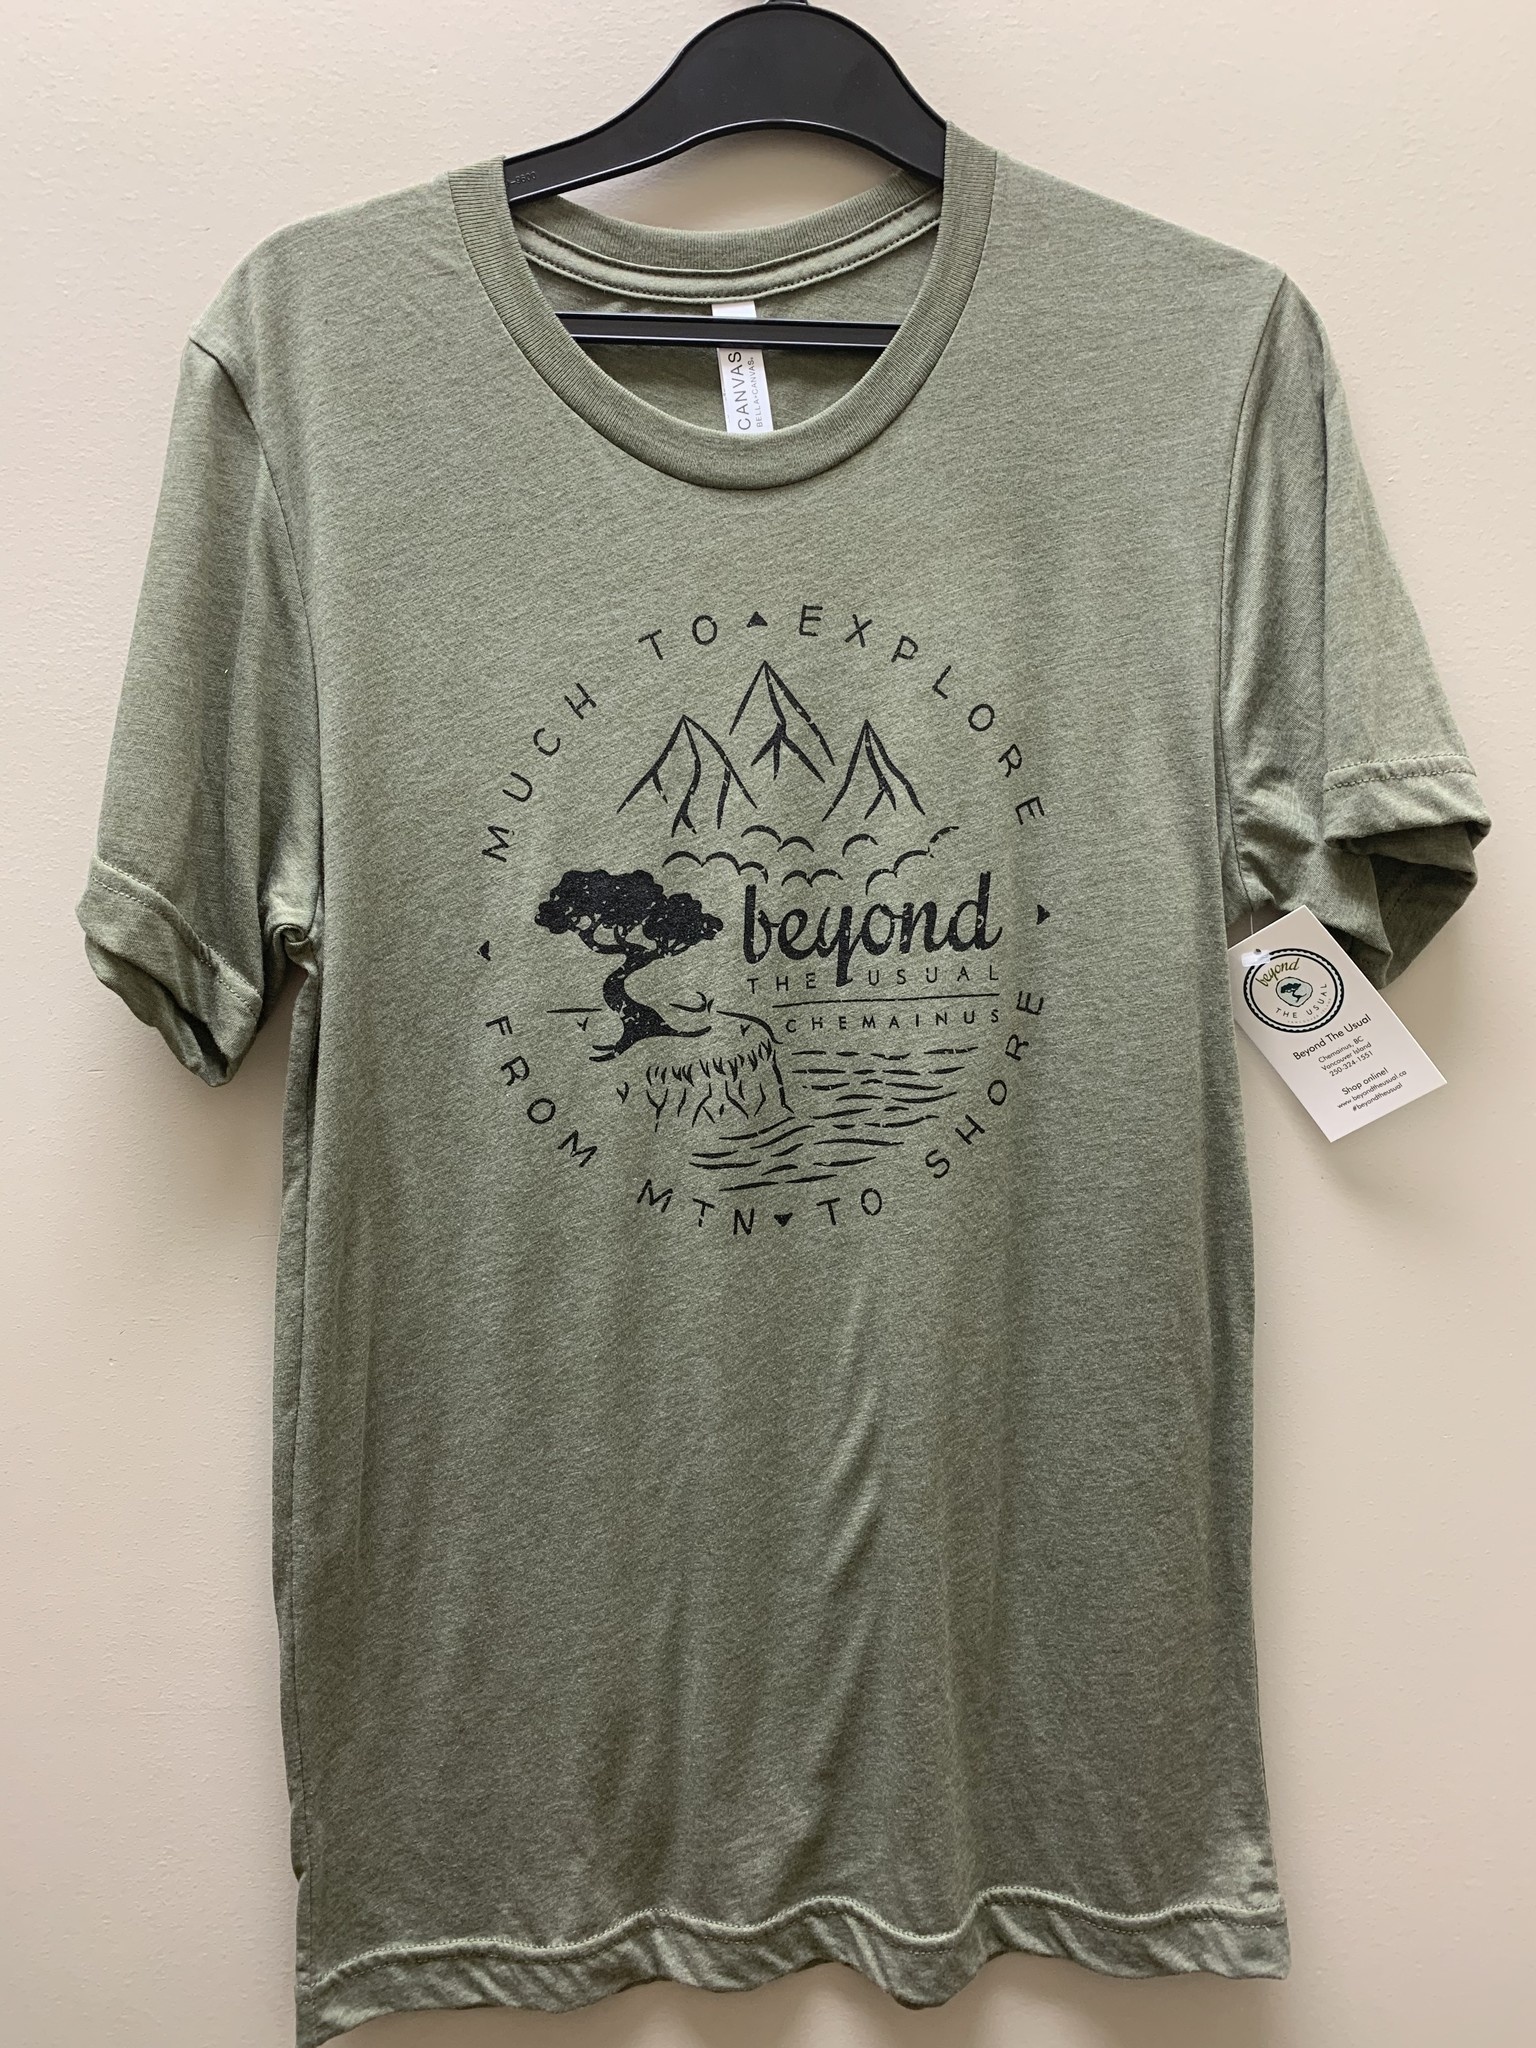 Beyond The Usual BTU Adult Unisex Compass S/S Tee - Olive